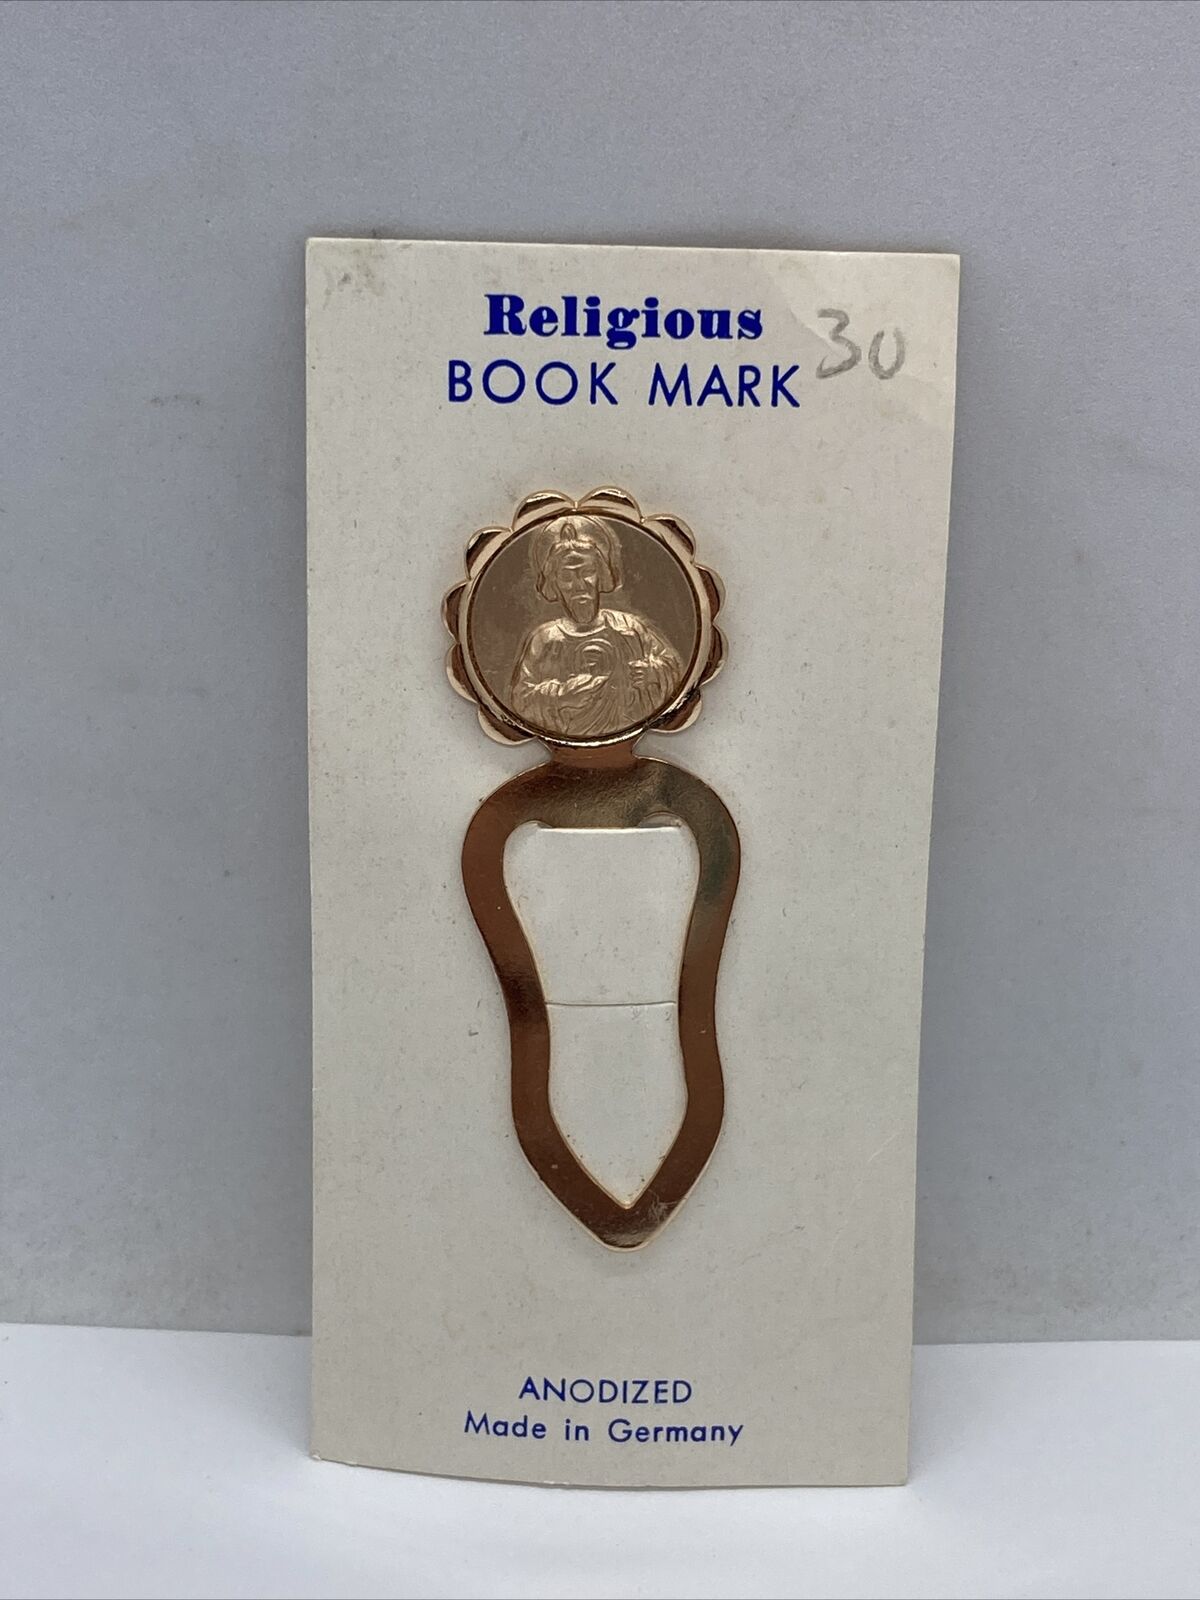 Vintage Anondized Religious Book Mark - Made in Germany